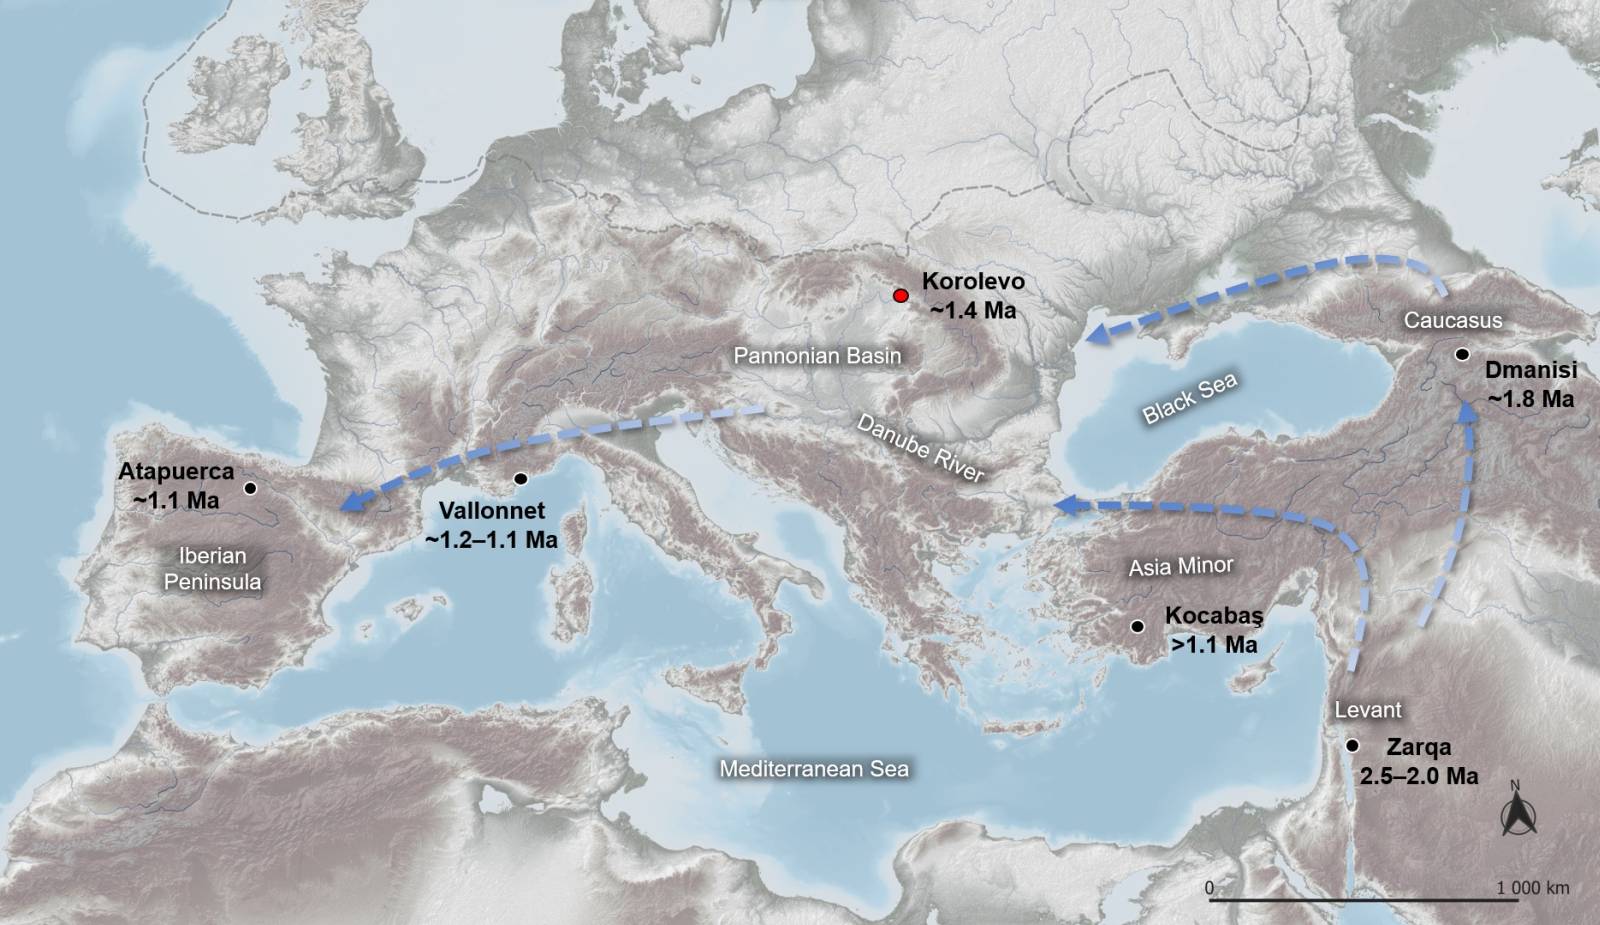 A map depicting the oldest human settlements and the direction of the dispersal routes of the first hominins into Europe from Africa via the Middle East (Zarqa) and the Caucasus (Dmanisi) by way of Ukraine (Korolevo, securely dated to 1.4 million years ago) and the Danube River migration corridor to the west of Europe, that is, Vallonnet in southern France (1.2–1.1 million years ago) and Atapuerca in Spain (1.2–1.1 million years ago).